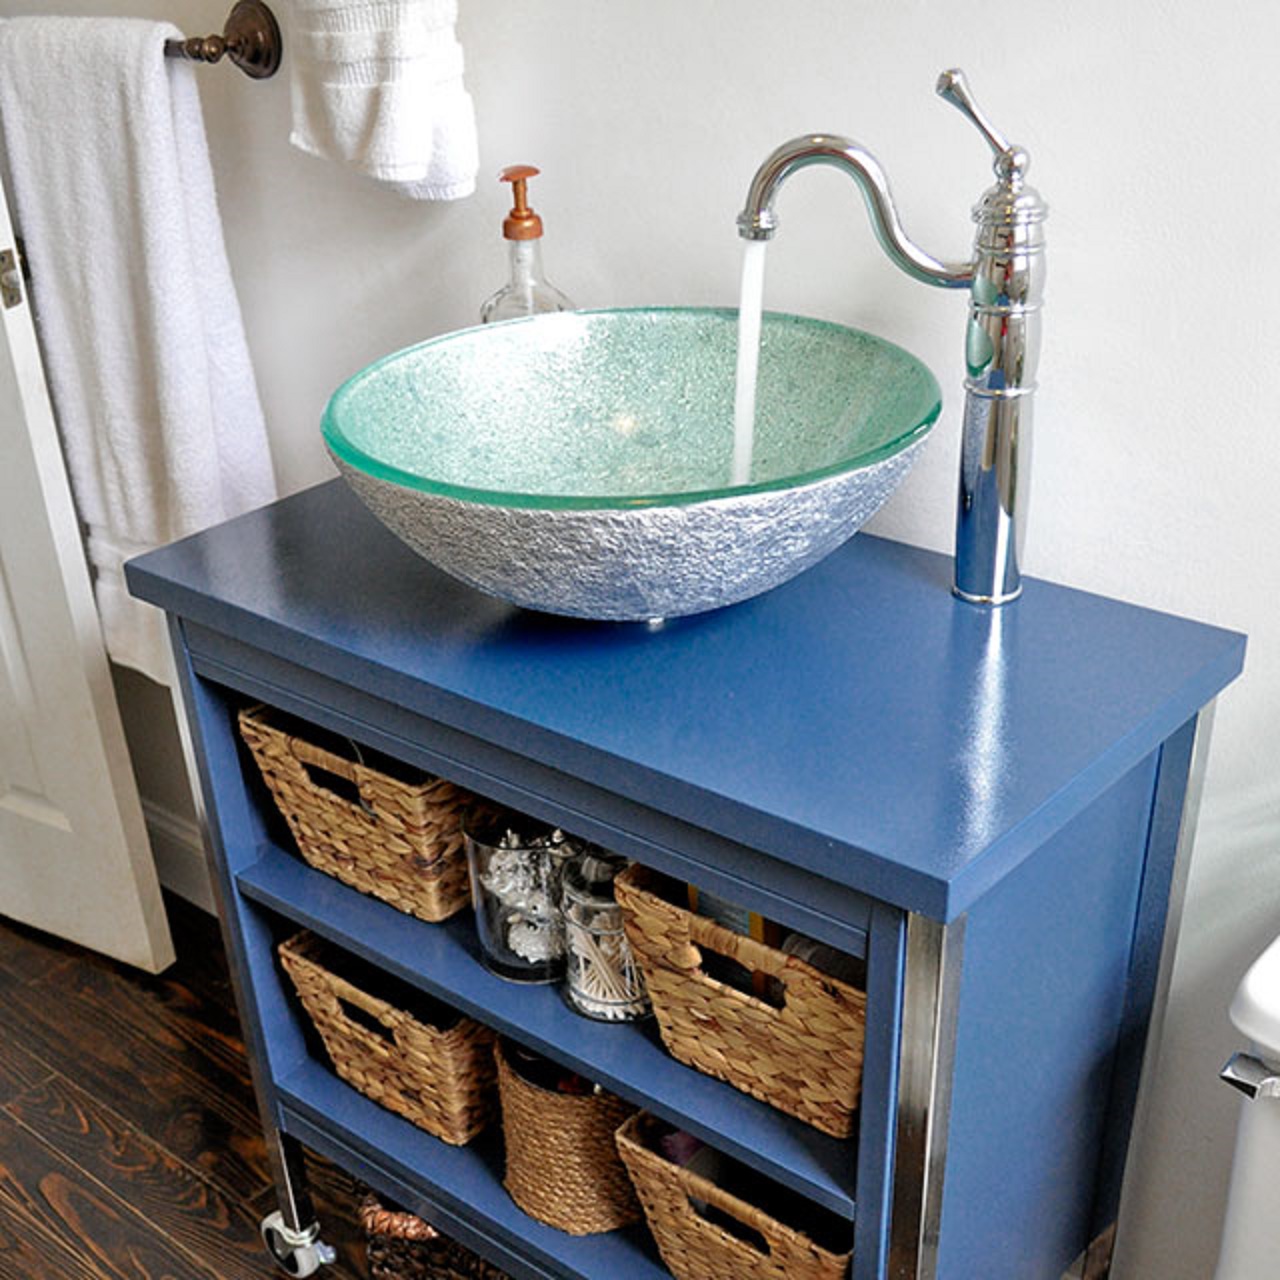 Budget Home Improvement: Turning a Metal Cabinet into a Vanity, Pt. 2